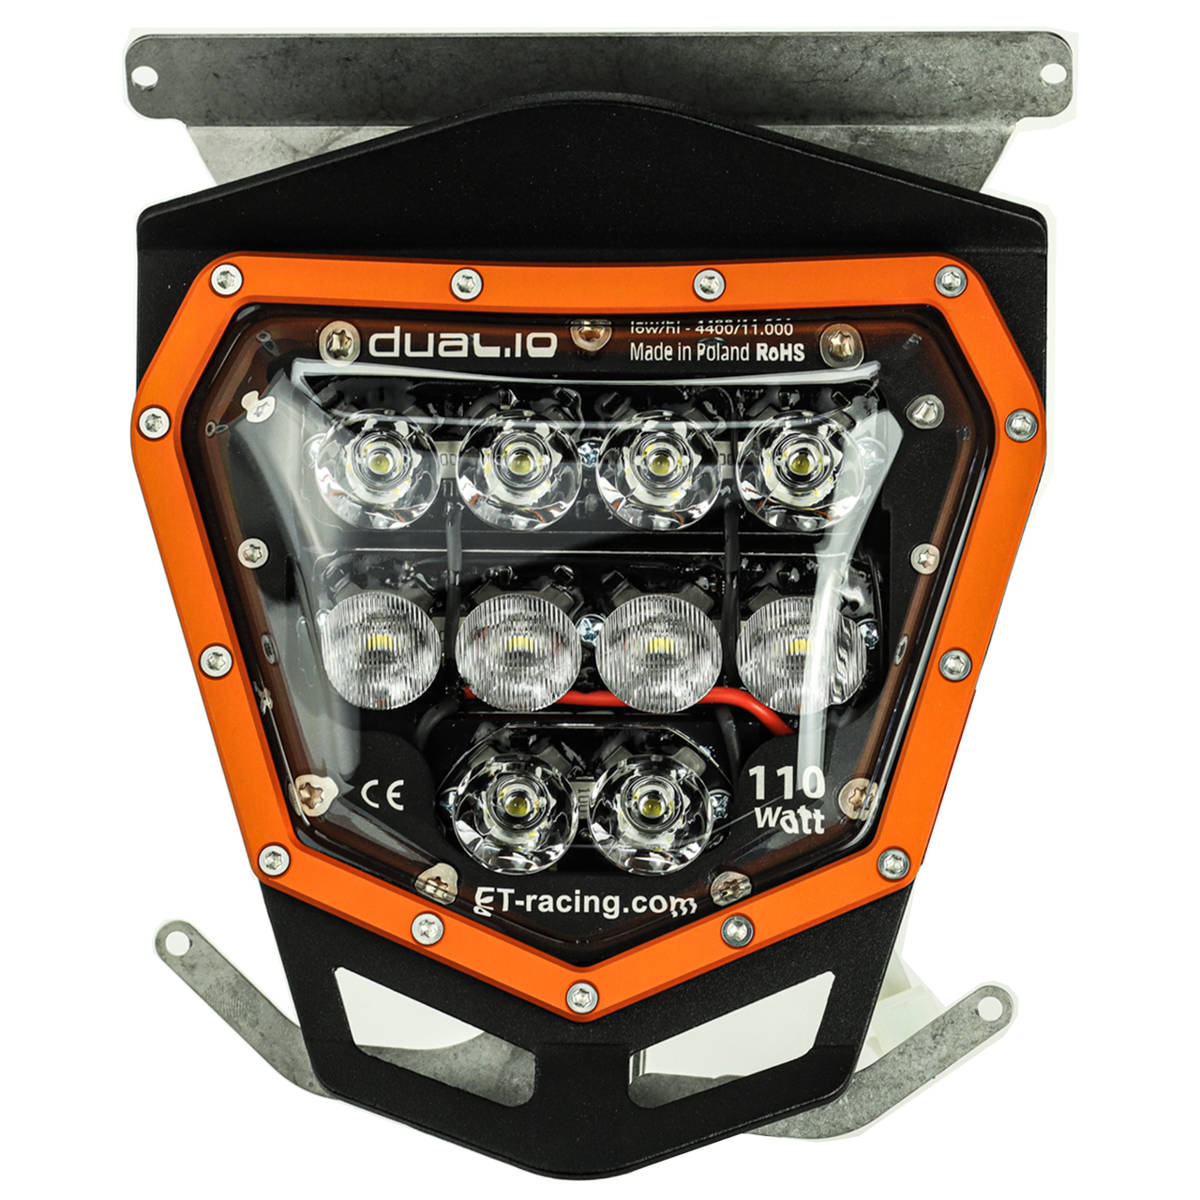 yKTMzLED lamp Headlight Dual.10 KTM 690 2012-2016 only FUEL INJECTION engine. Extra Terrestrial 11000 lumens